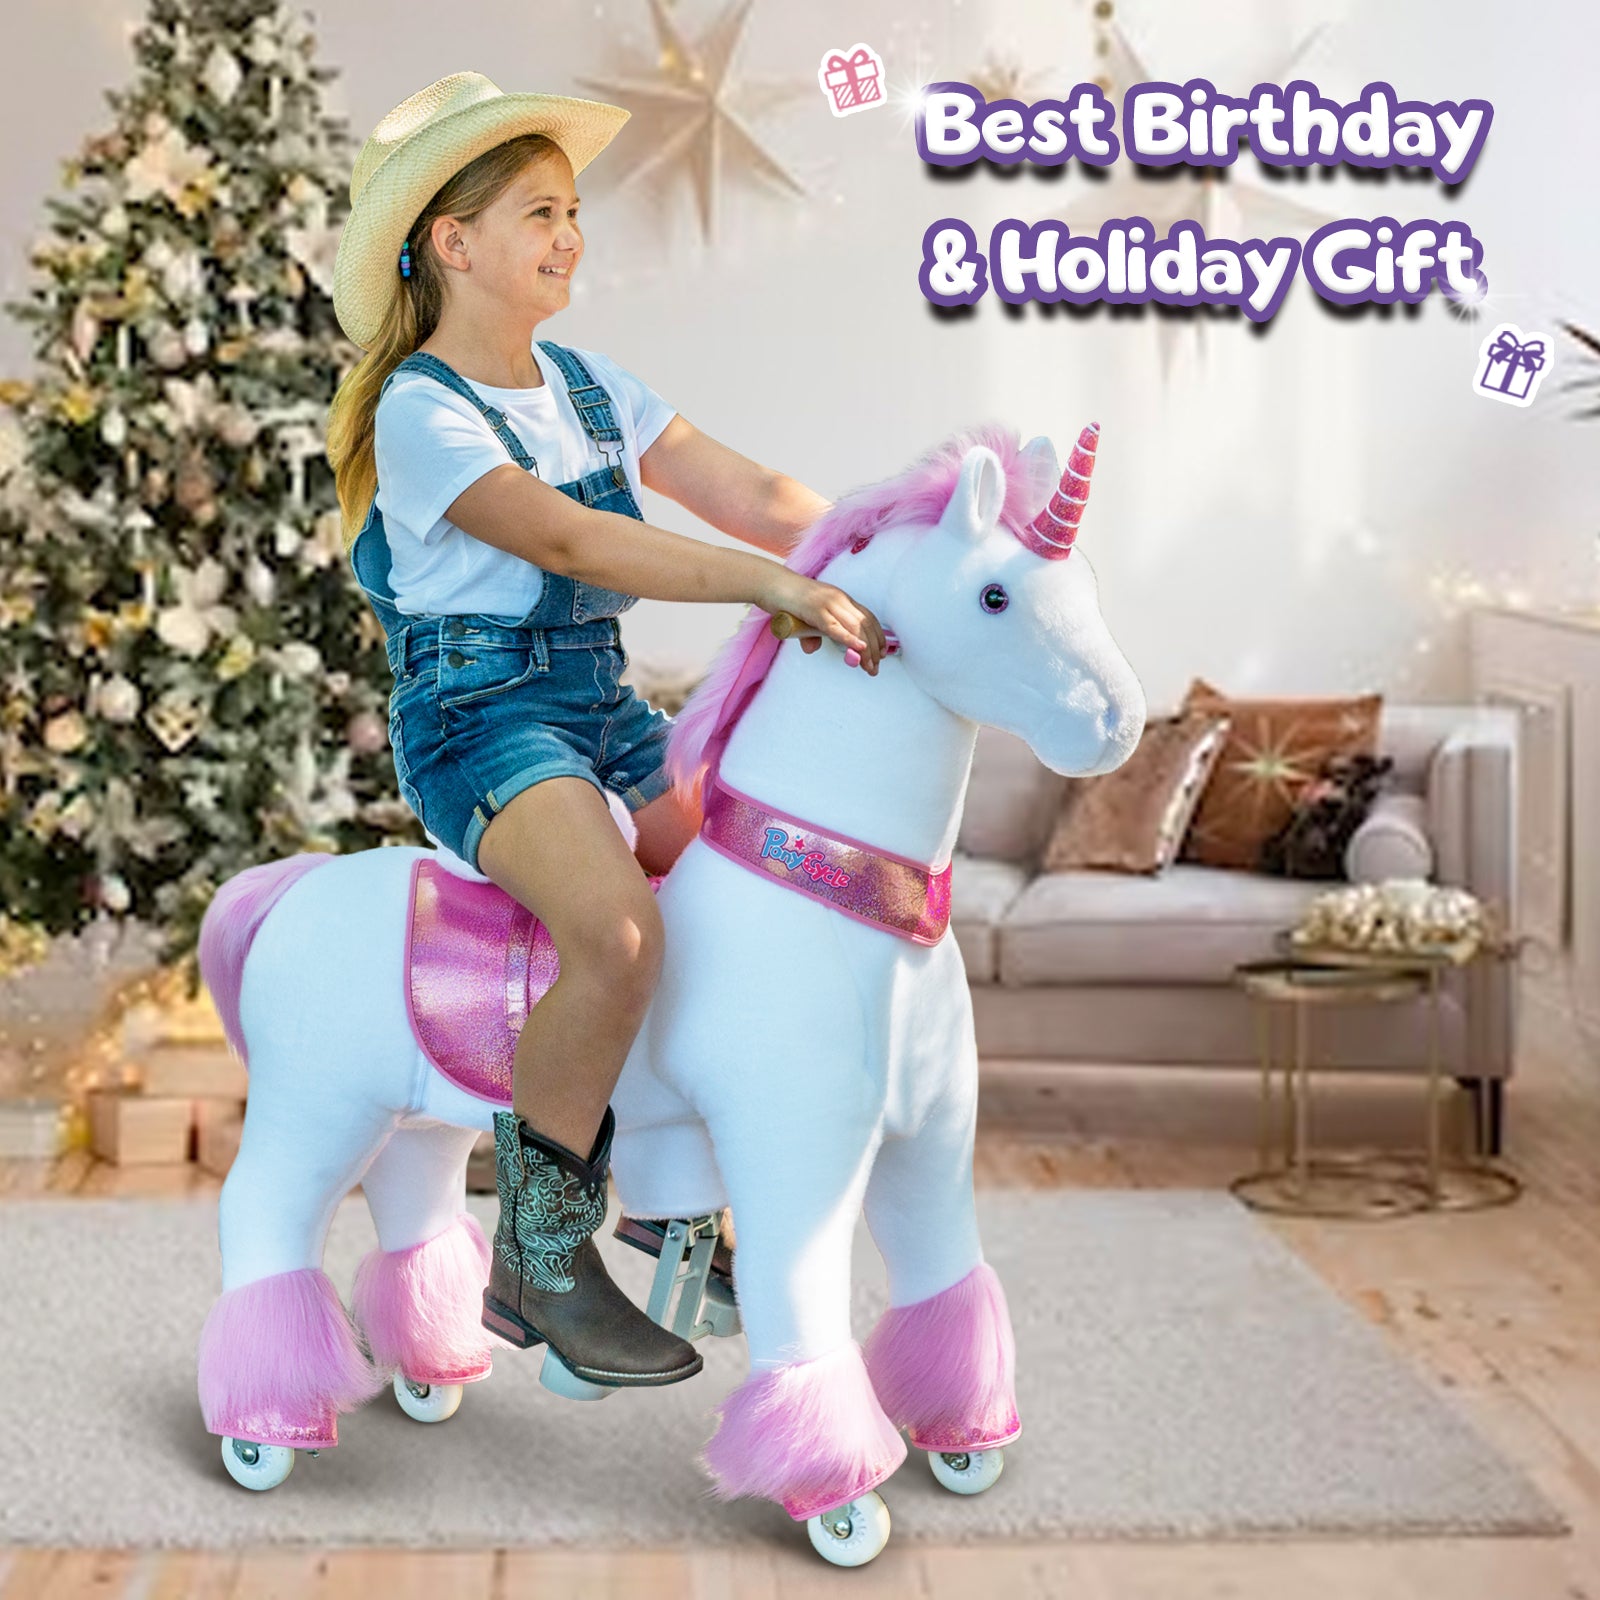 PonyCycle ride on unicorn toy is best gift for kids! – PonyCycle 